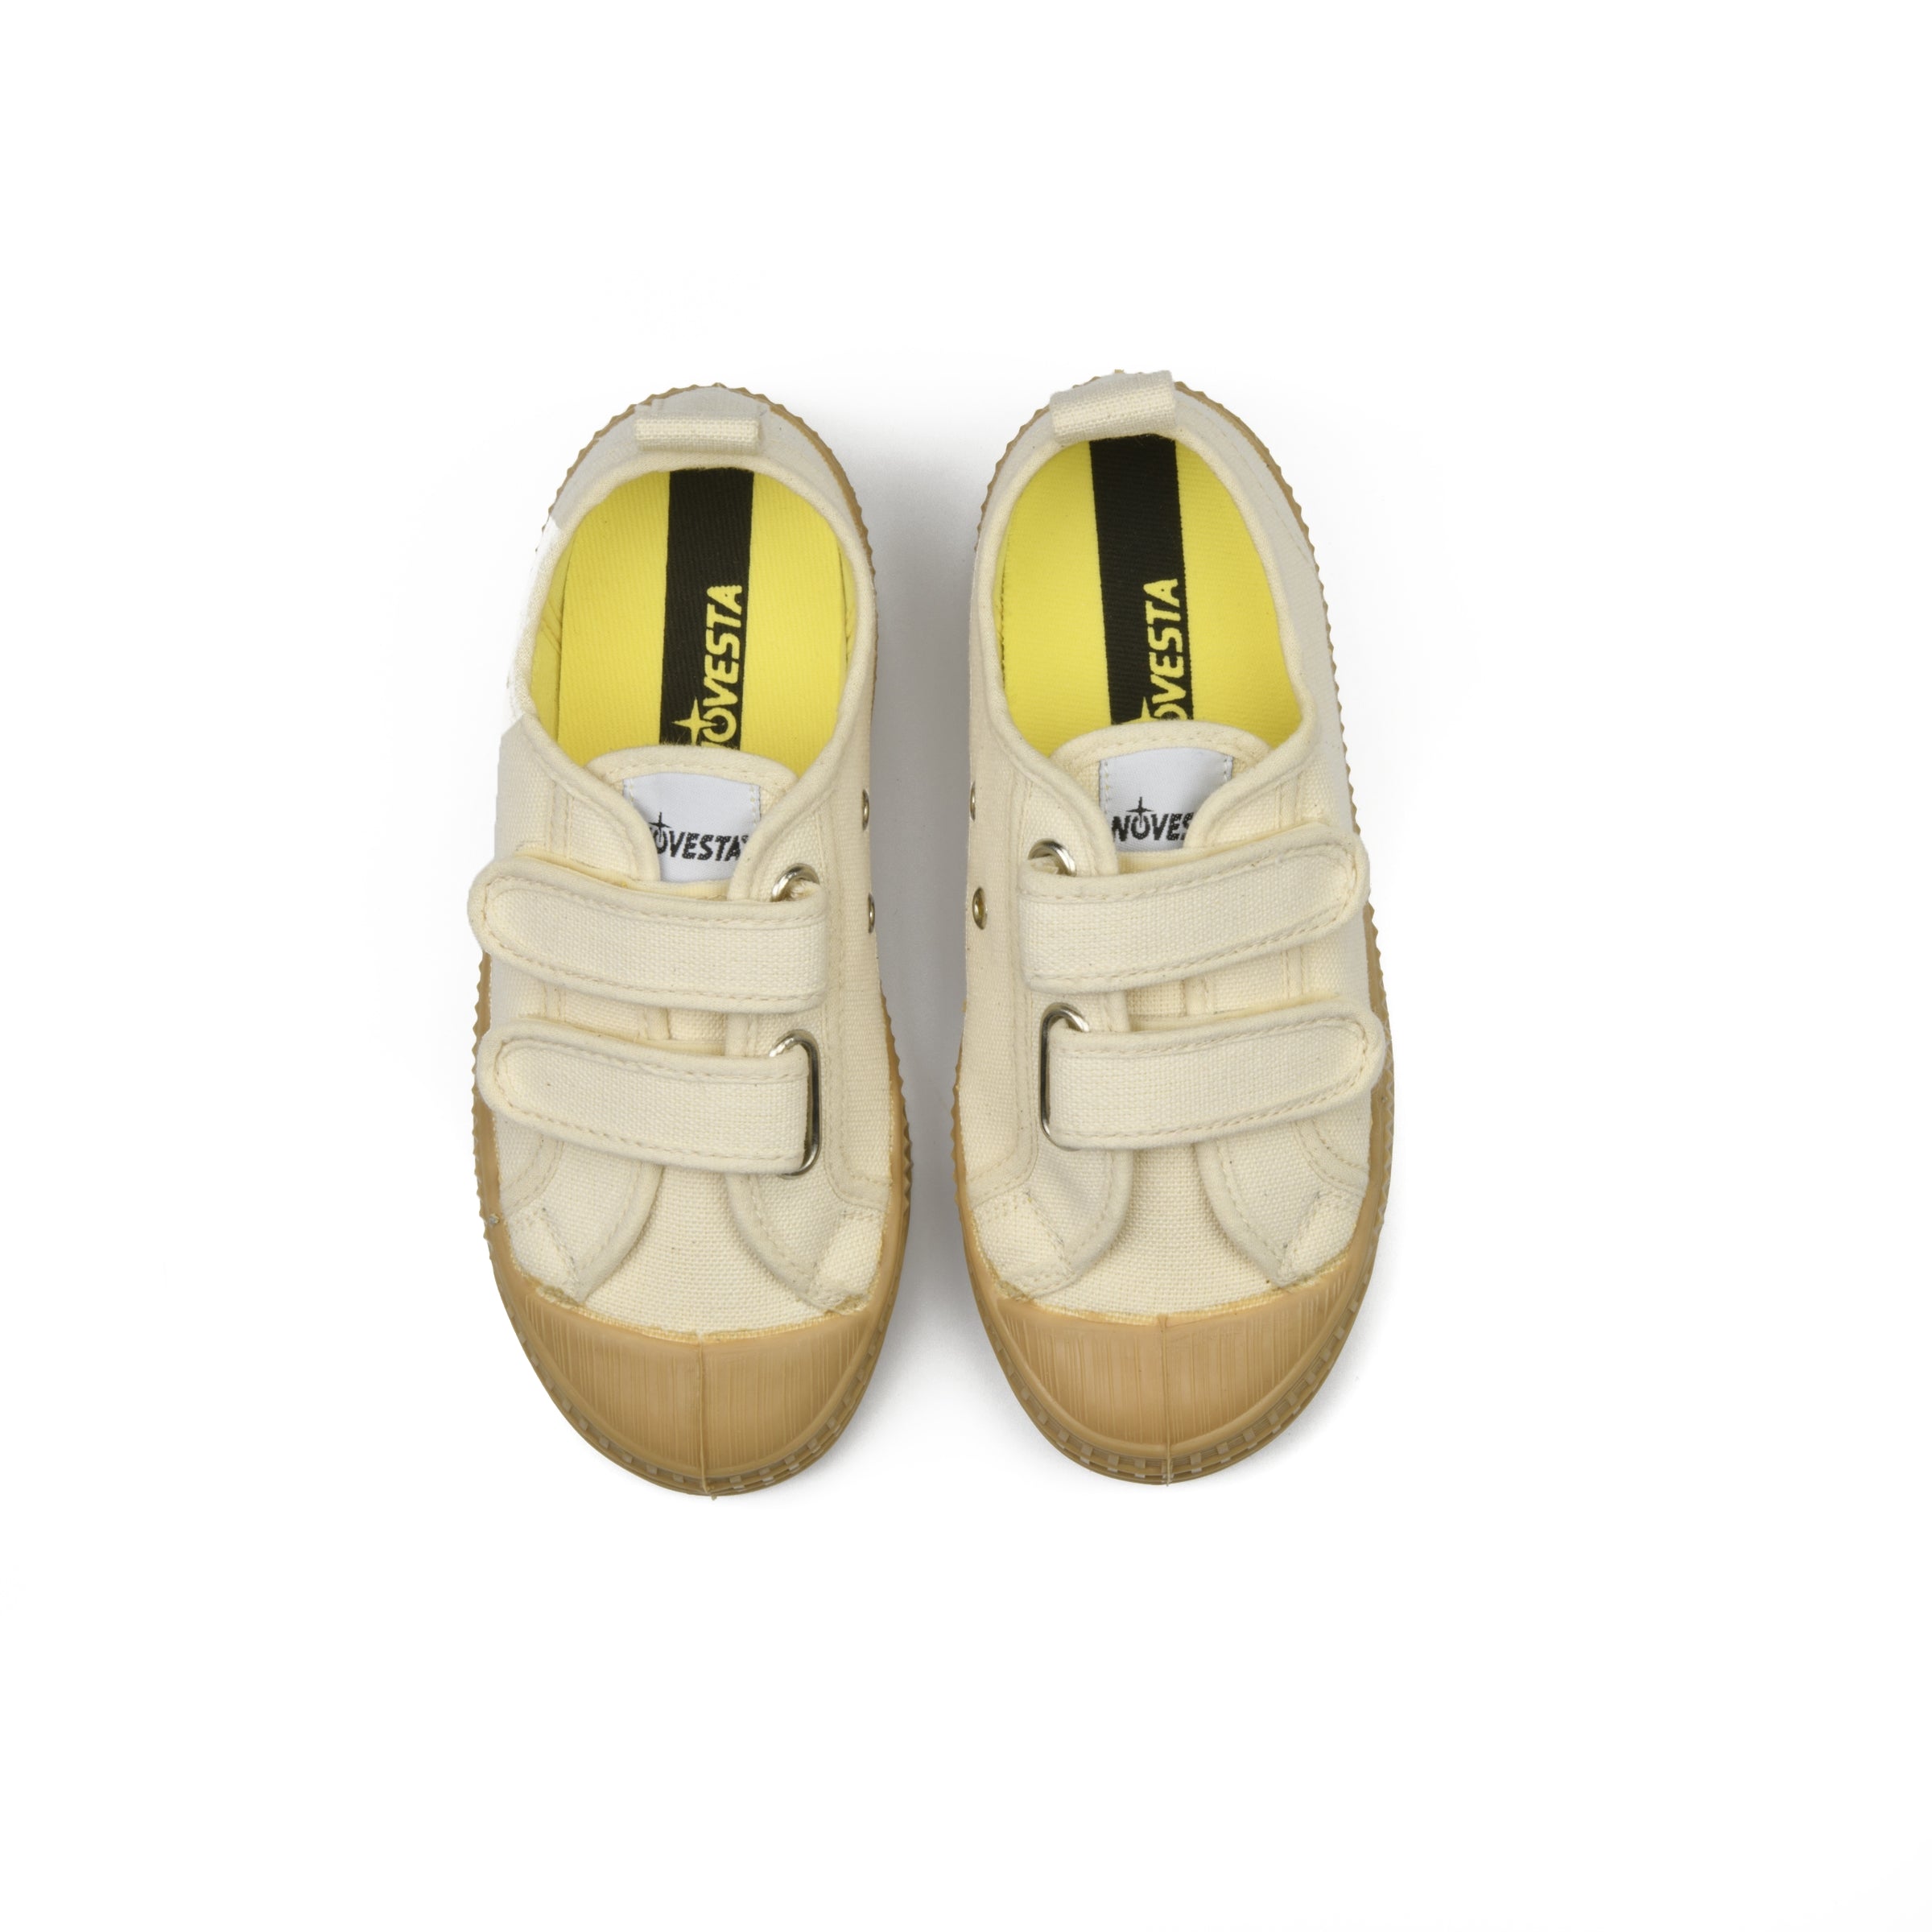 Boys & Girls White Canvas Shoes